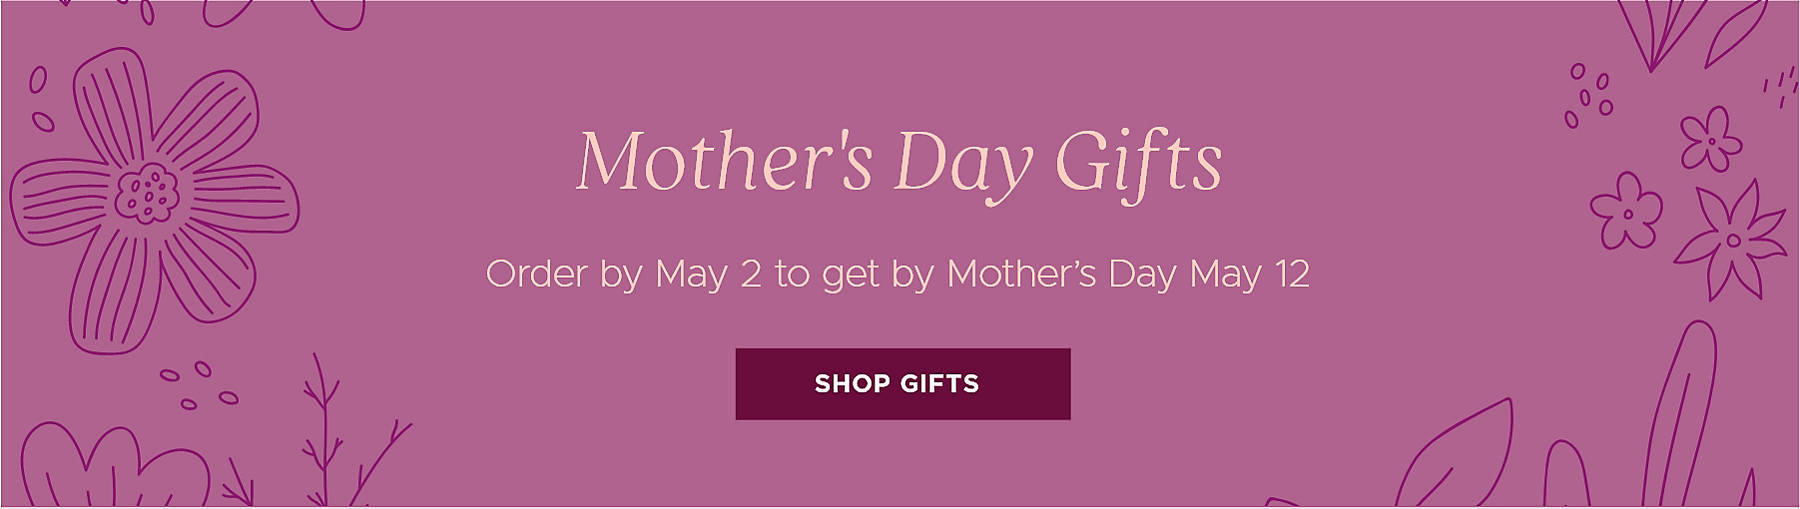 Mother's Day Gifts Order by May 2 to get by Mother's Day May 12 Shop Gifts